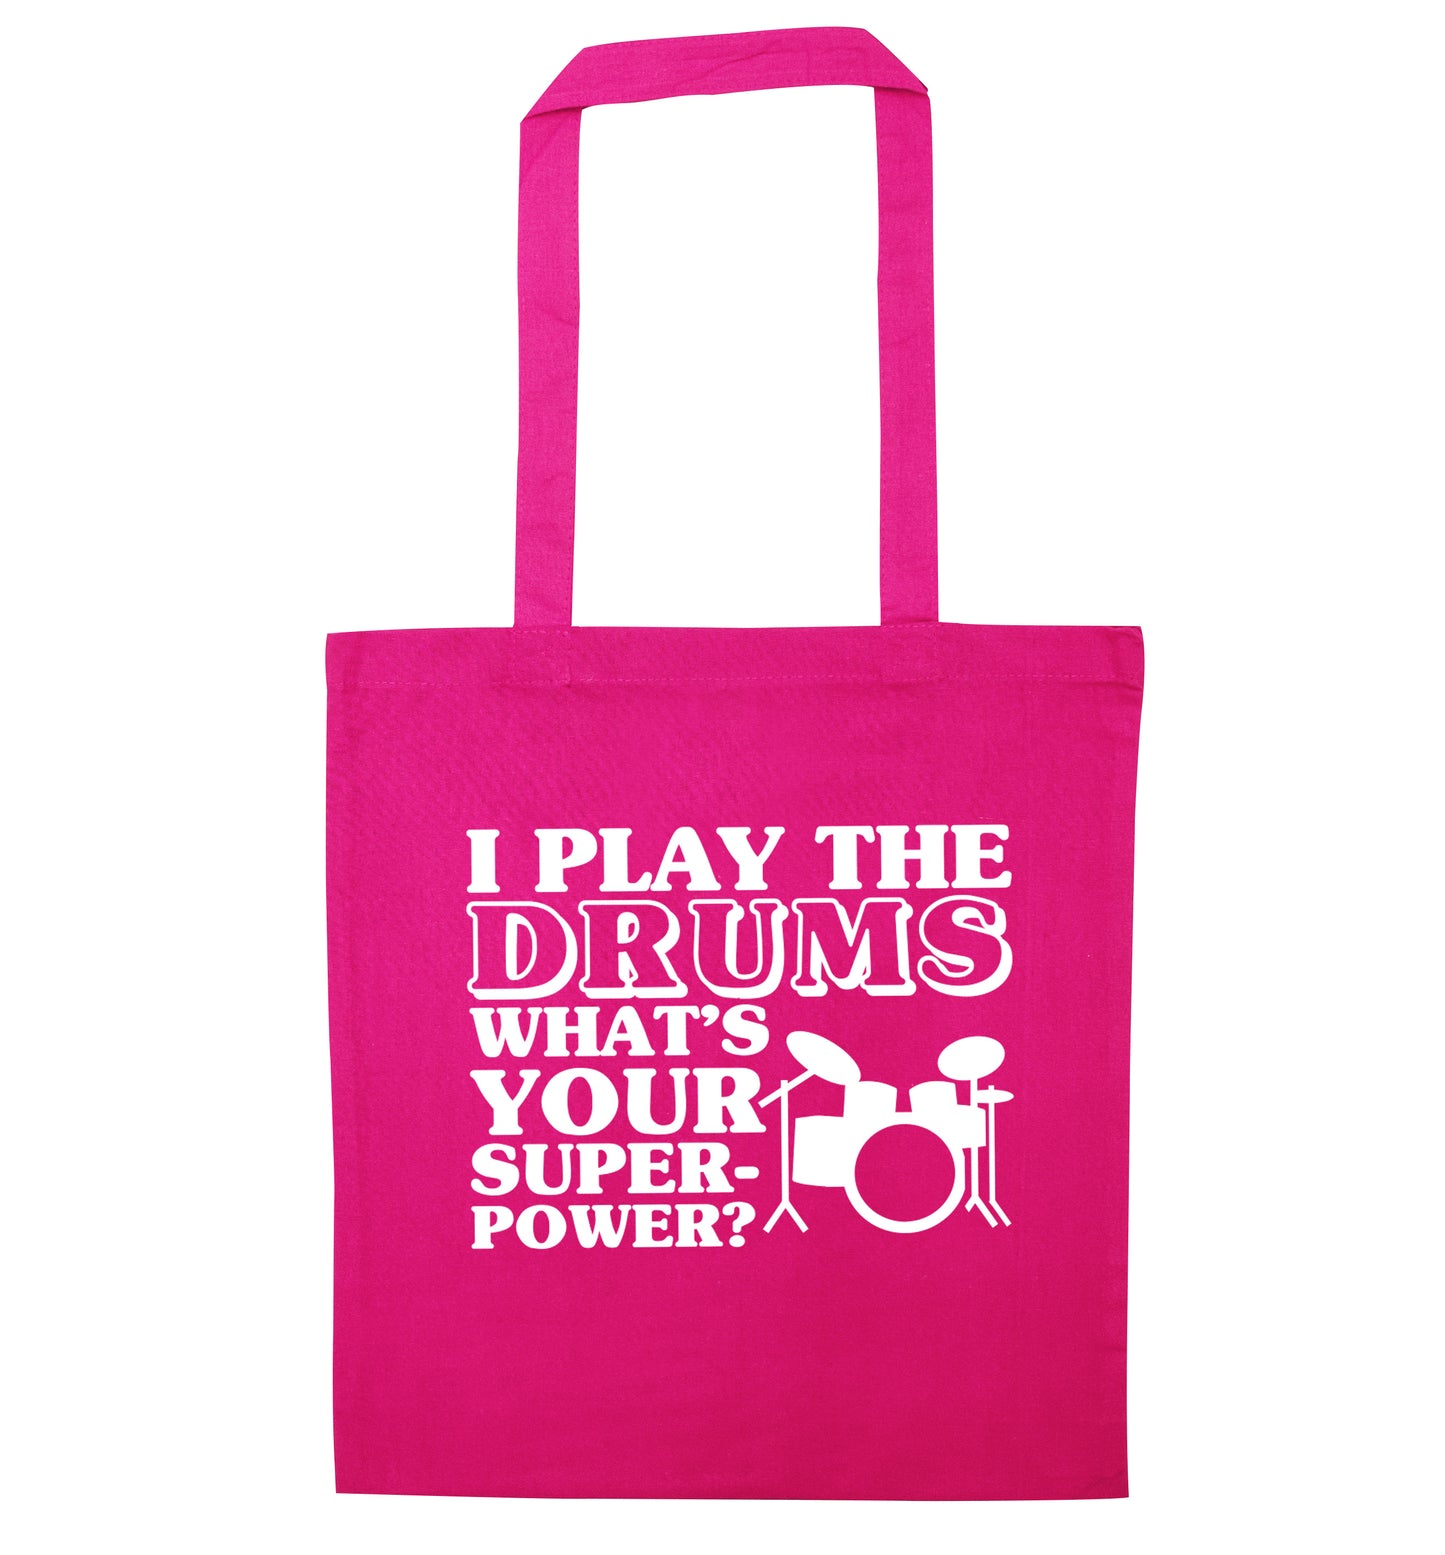 I play the drums what's your superpower? pink tote bag